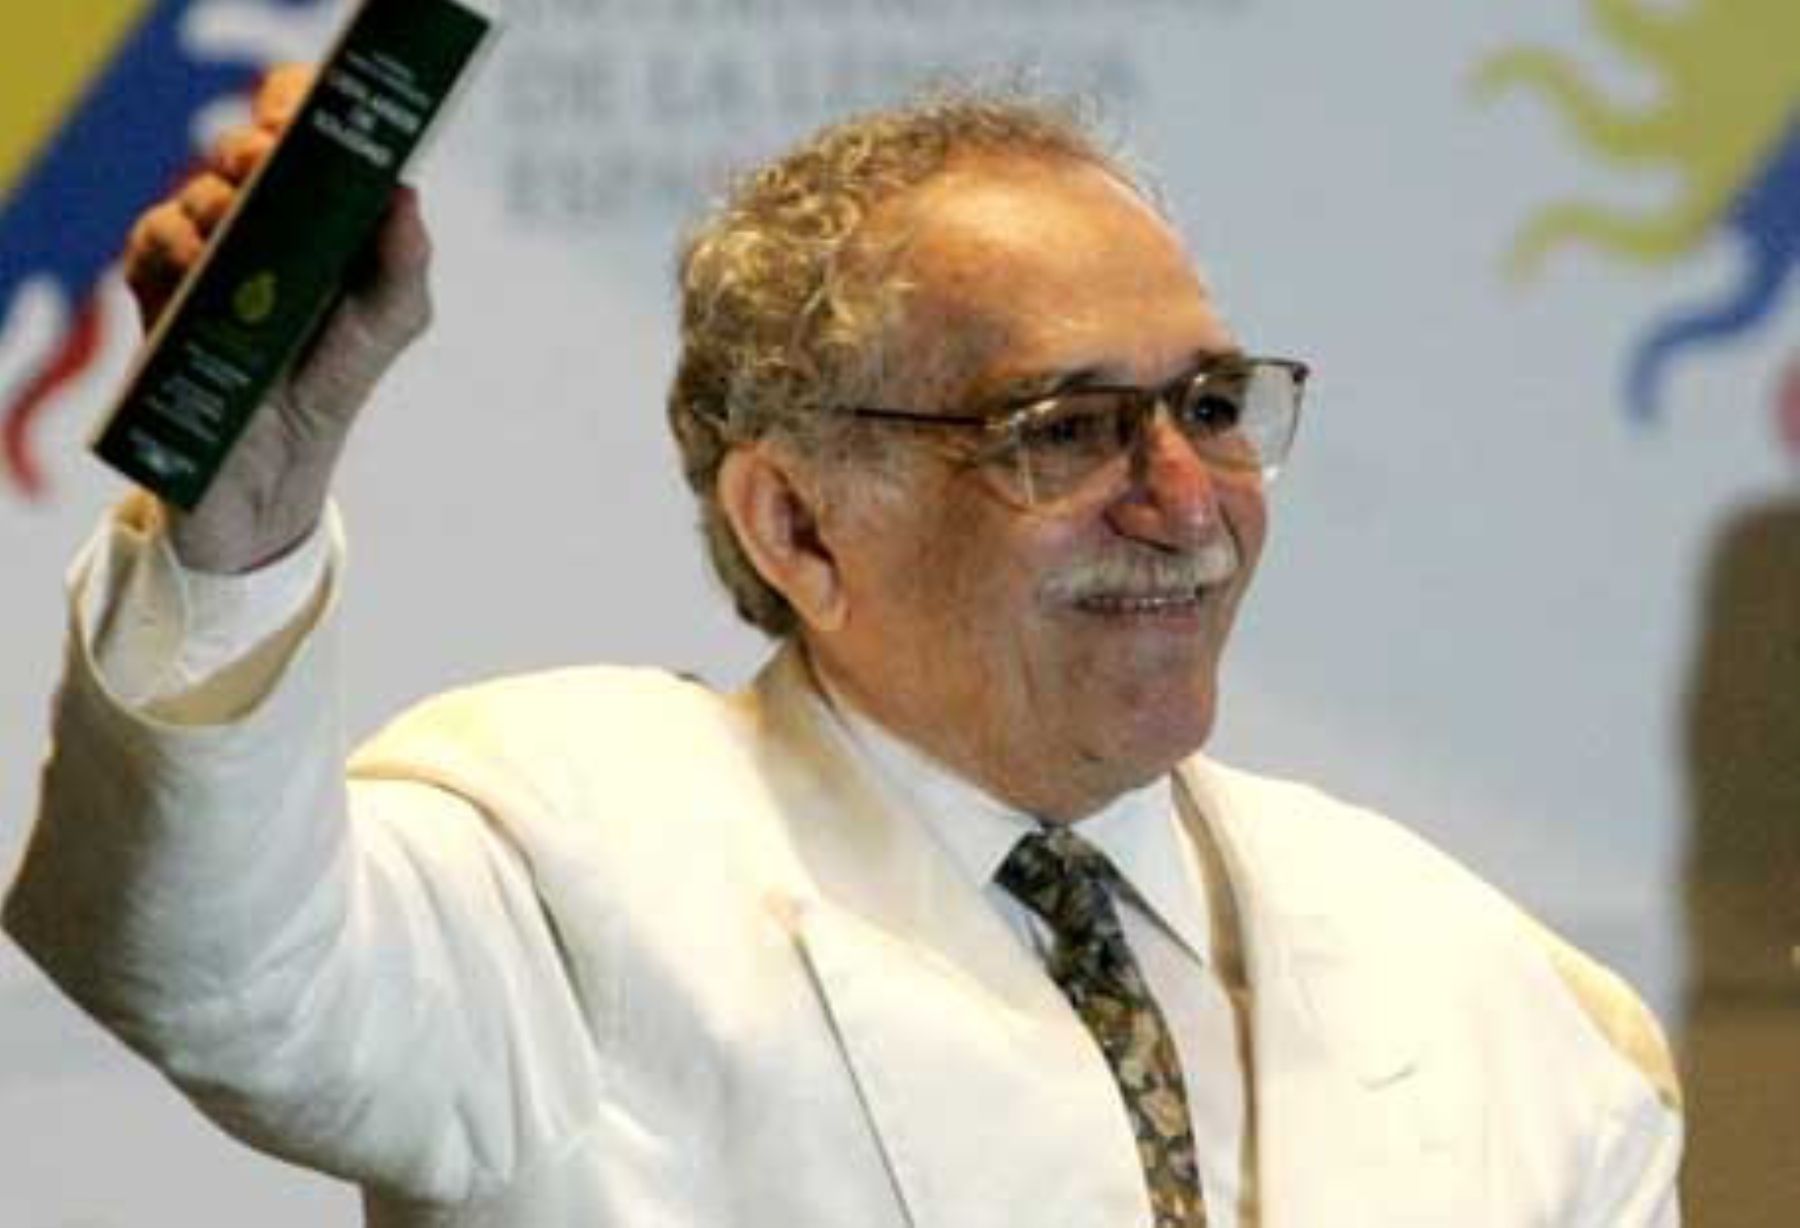 Garcia Marquez, known as "Gabo" in Latin America, passed away on Thursday.